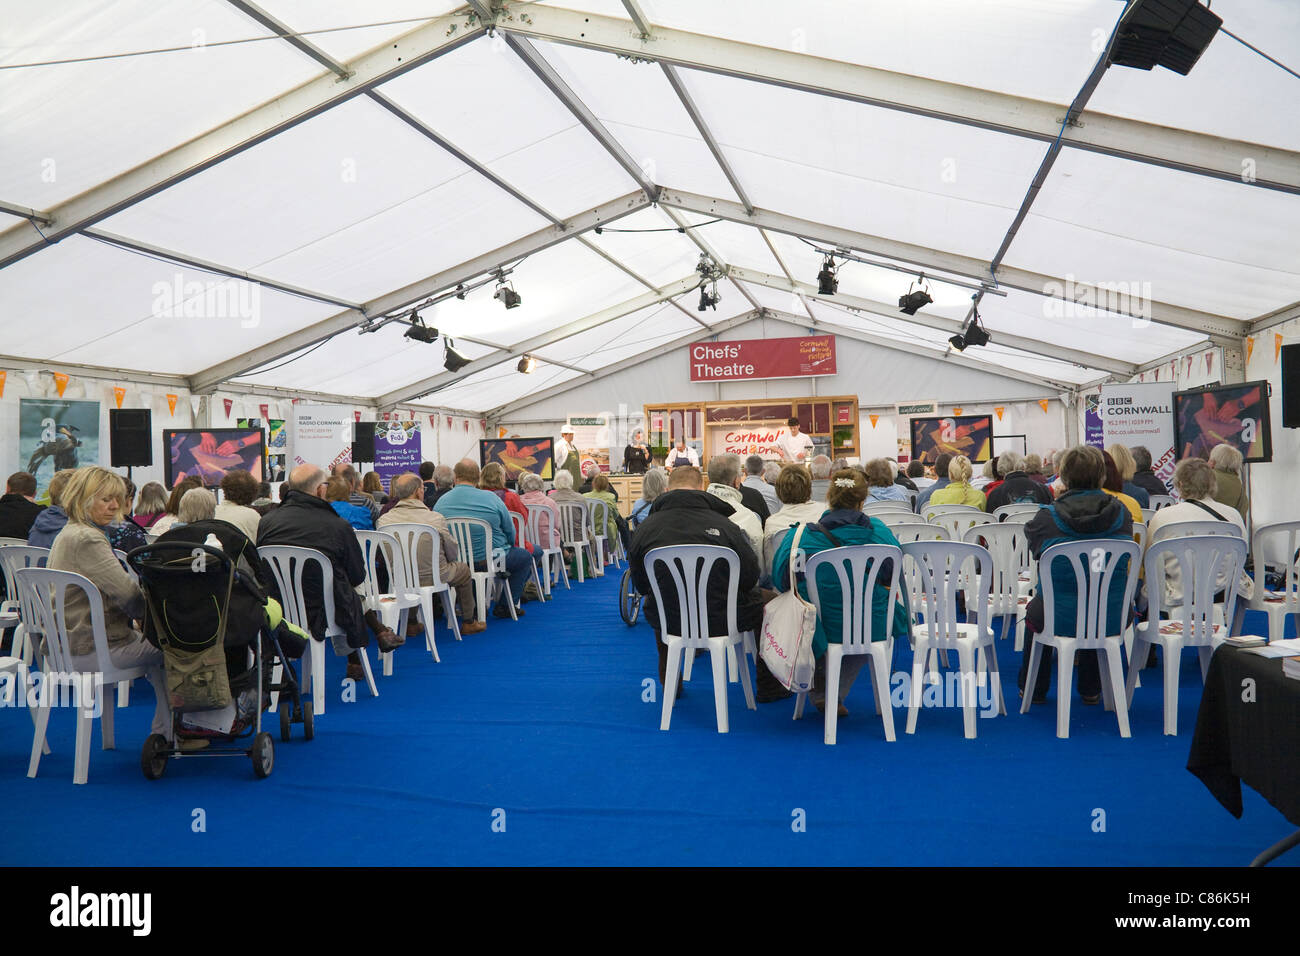 Audience in the Chefs Theatre watching a demonstration of food preparation at Cornish Food and Drink Festival Stock Photo